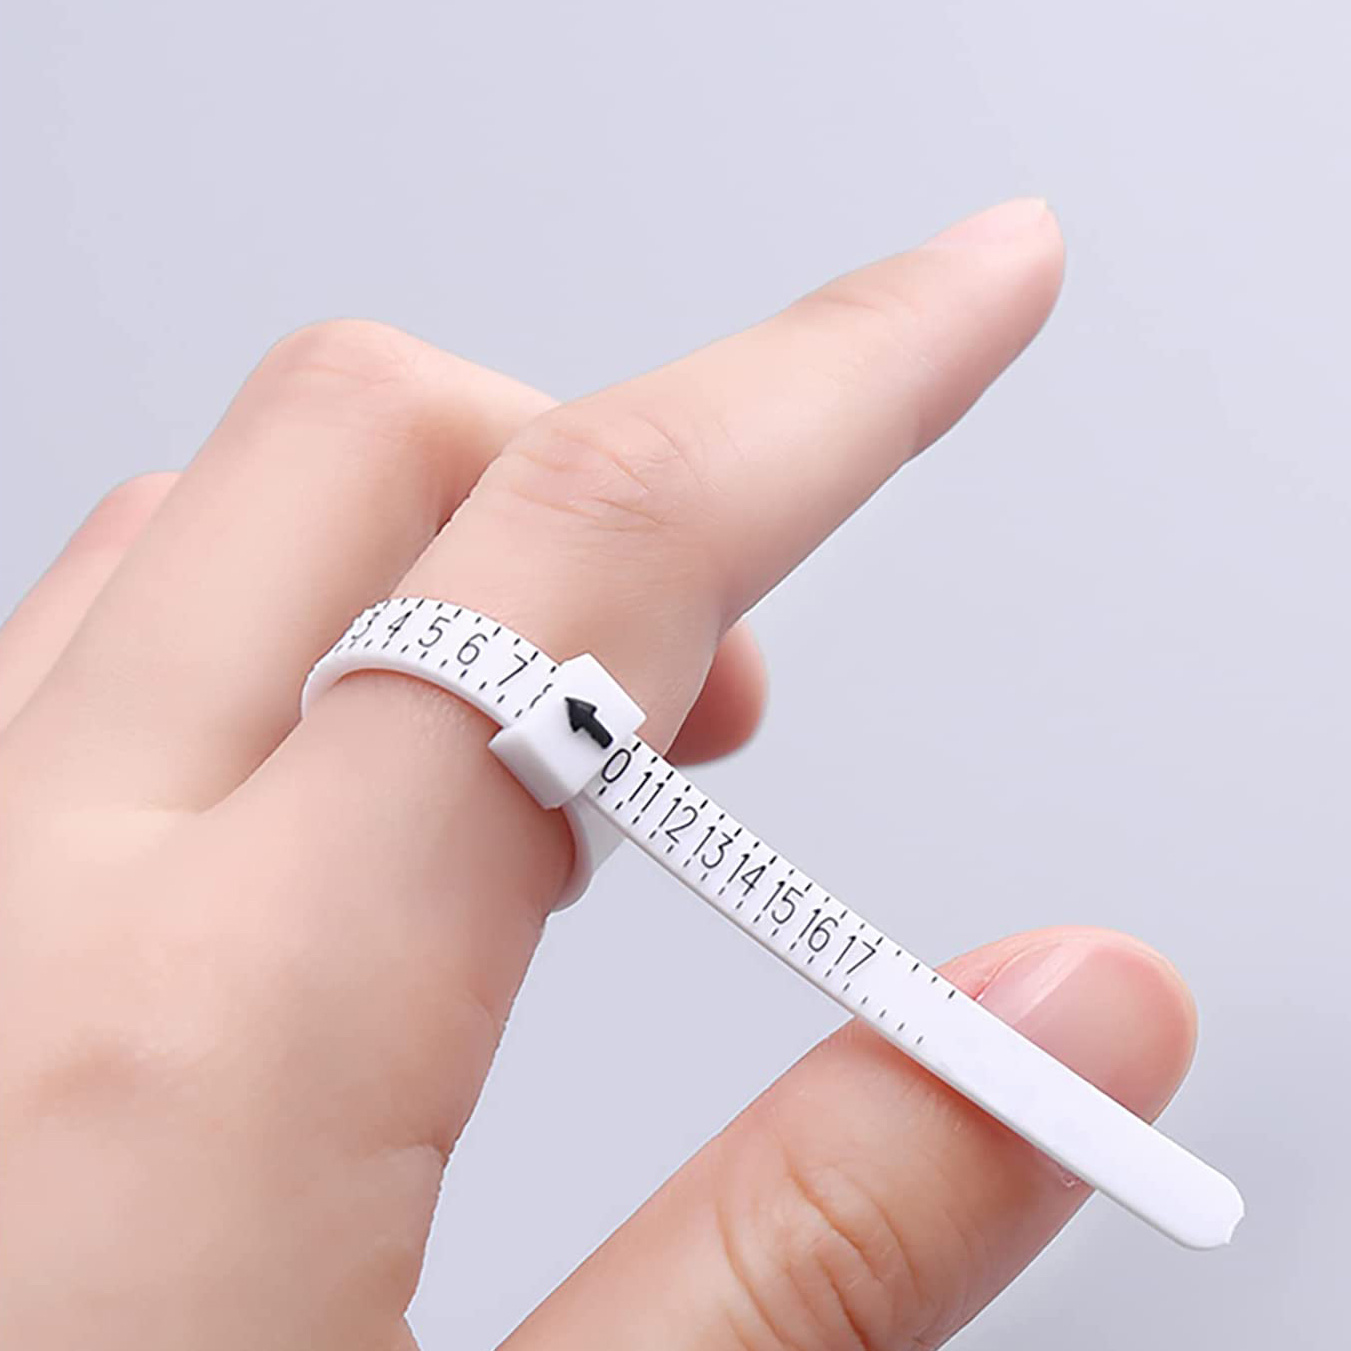 Dowsabel Ring Sizer Measuring Tool, Reusable Finger Size Measuring Tape with Magnified Glass, Clear and Accurate Jewelry Sizing Tool 1-17 USA Rings